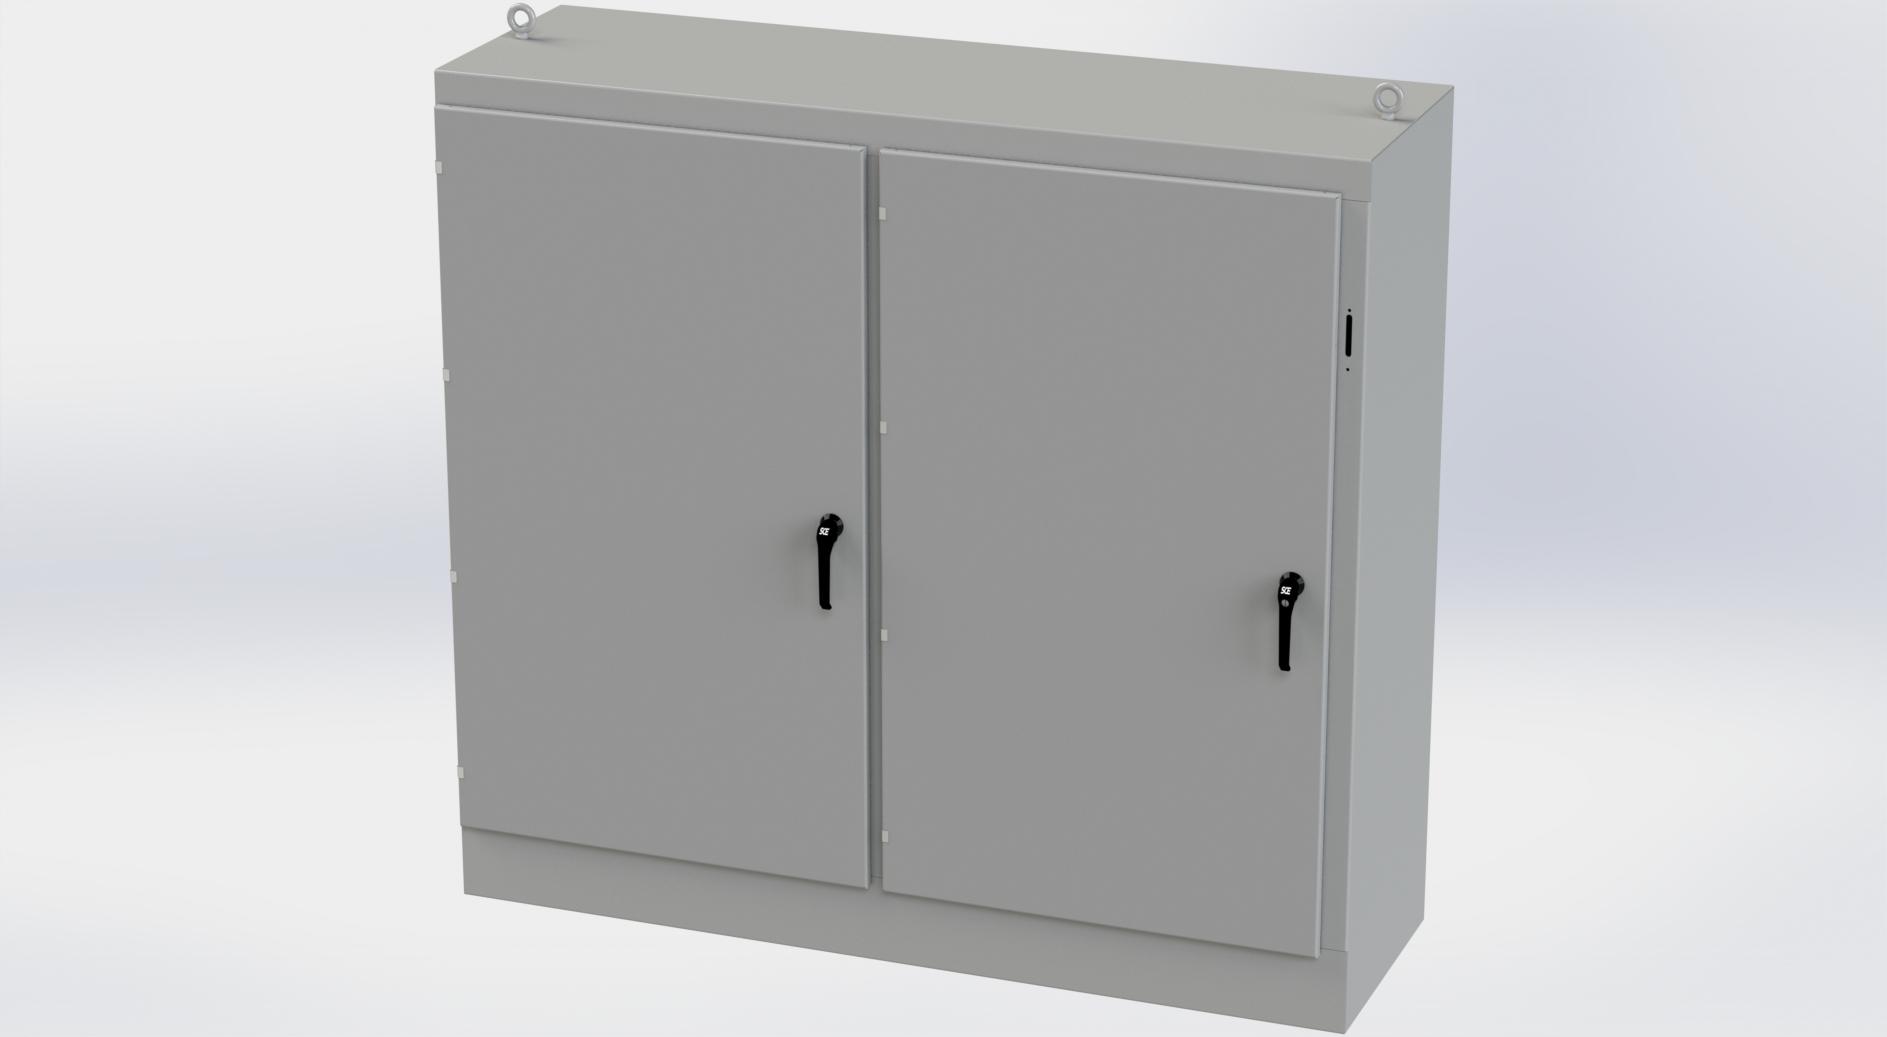 Saginaw Control SCE-72XM7824G 2DR XM Enclosure, Height:72.00", Width:77.75", Depth:24.00", ANSI-61 gray powder coating inside and out. Sub-panels are powder coated white.